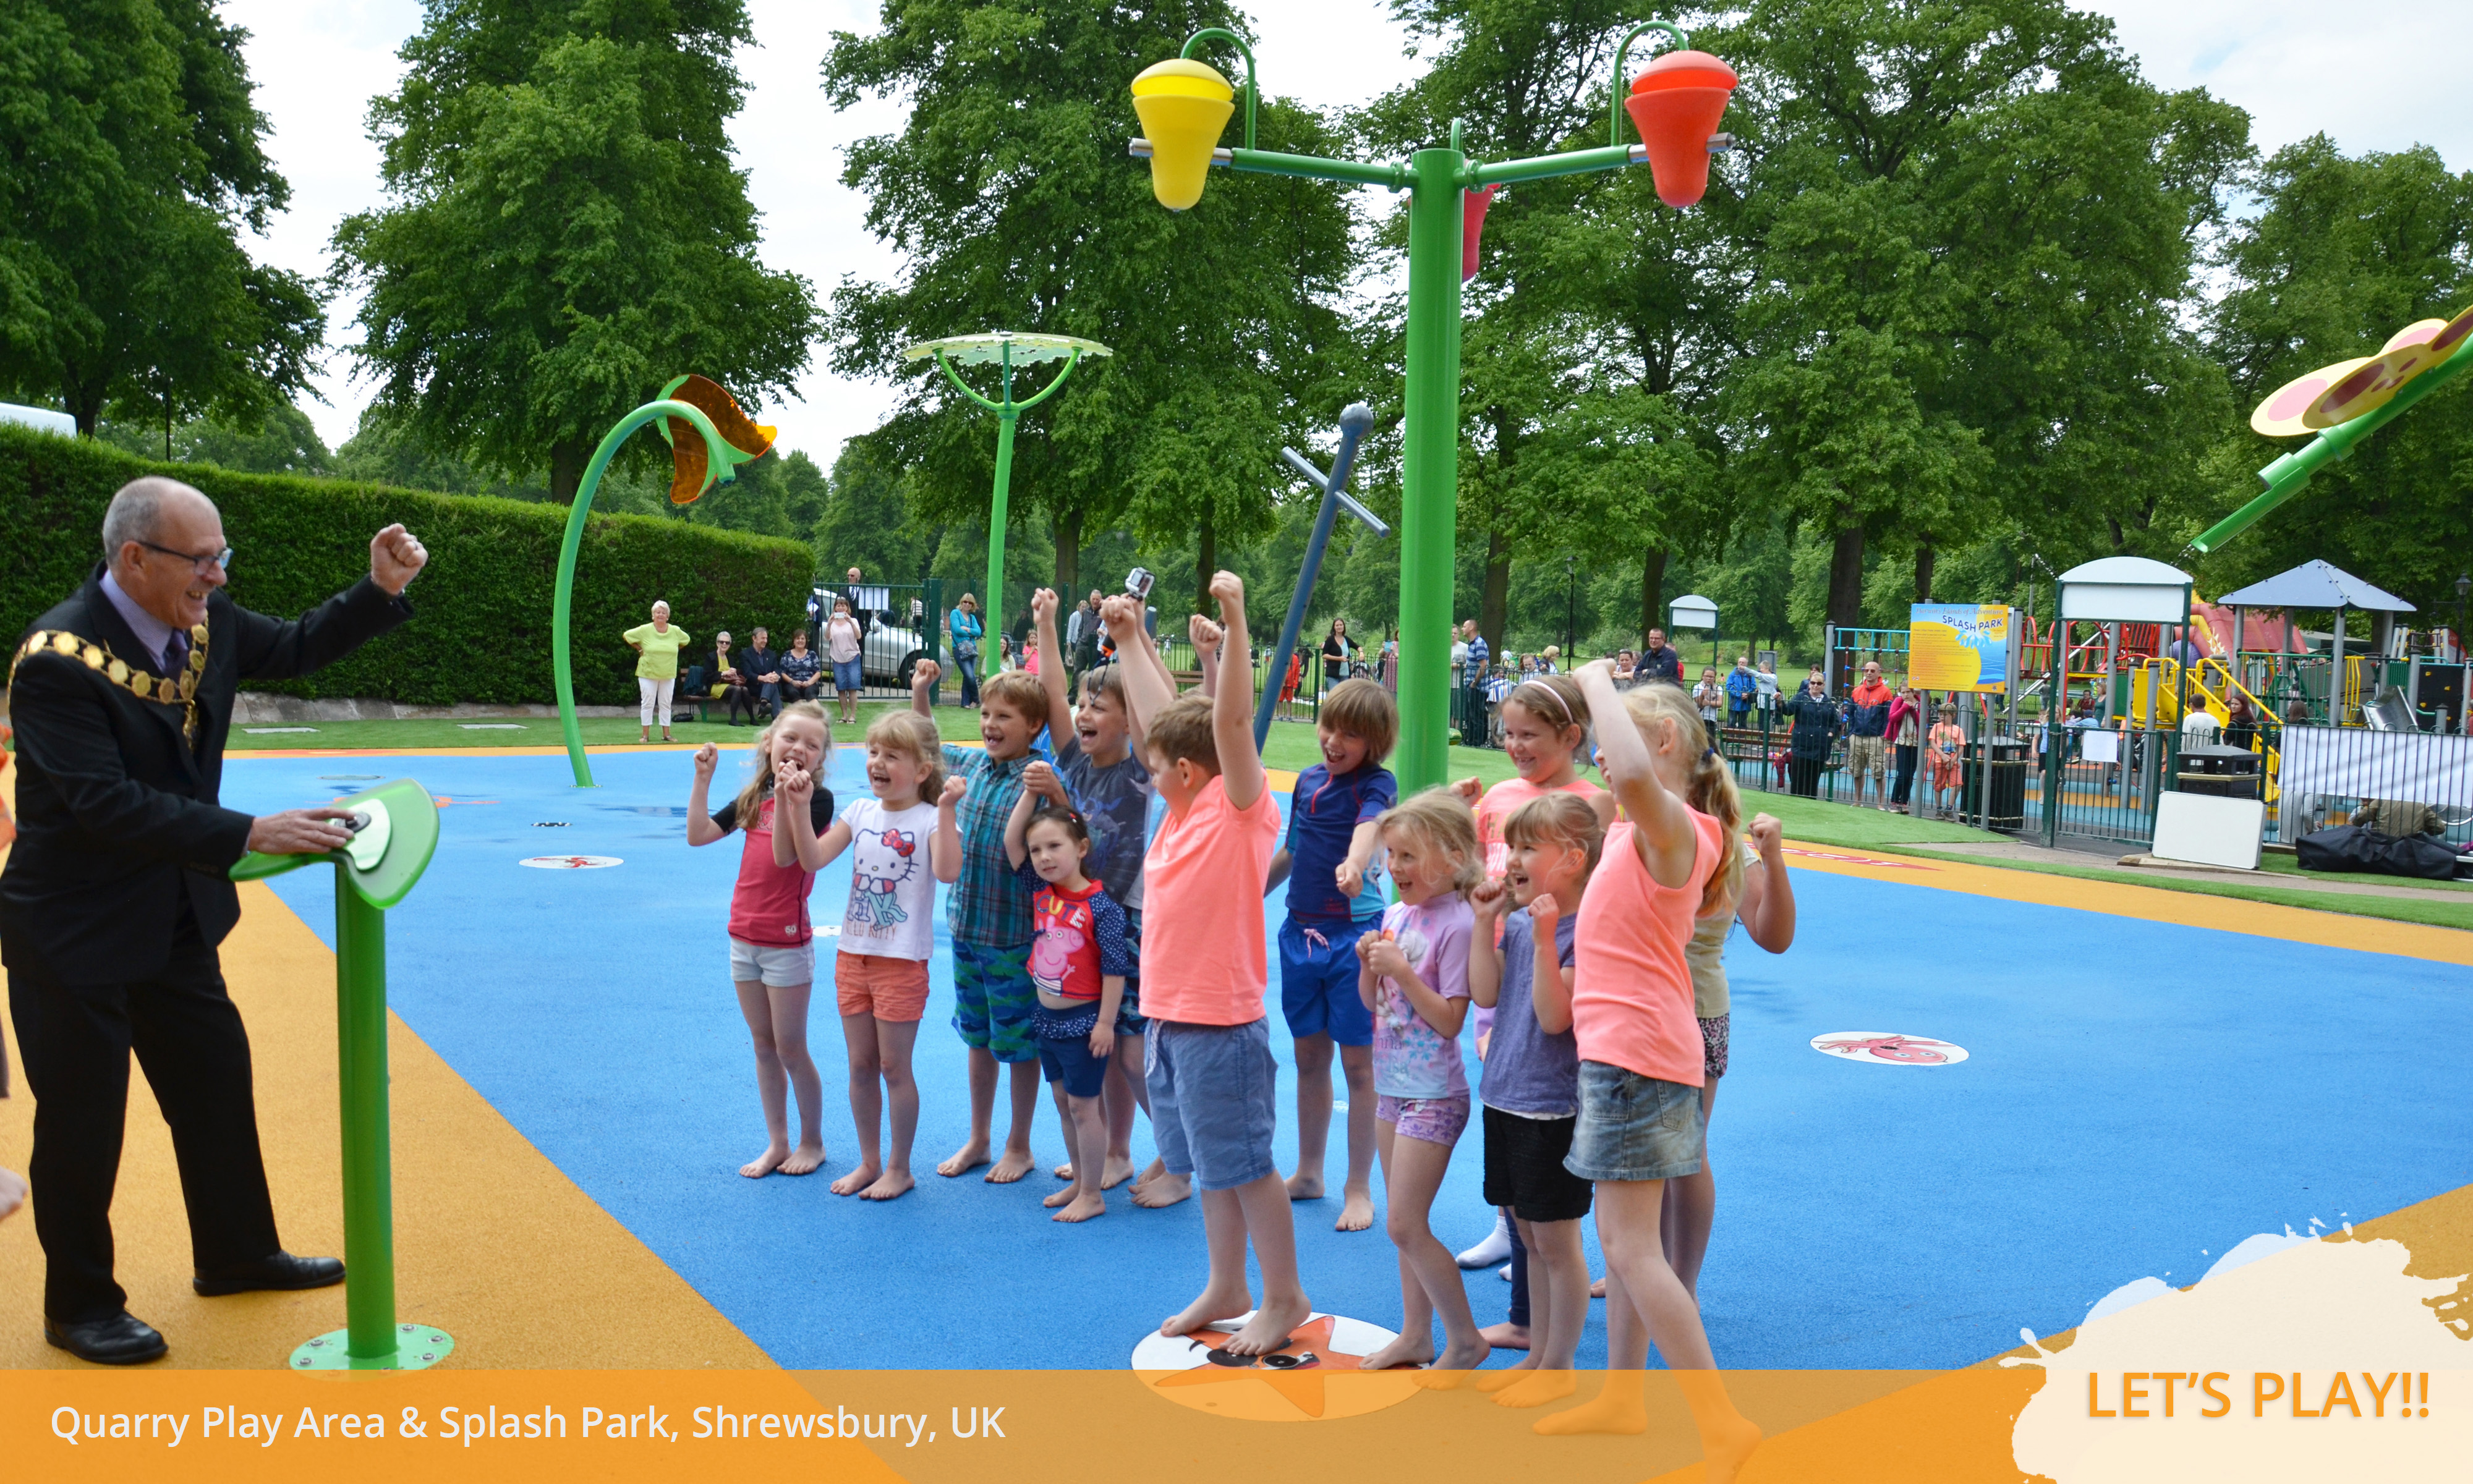 Opening Day - Query Play area & Splash Park UK